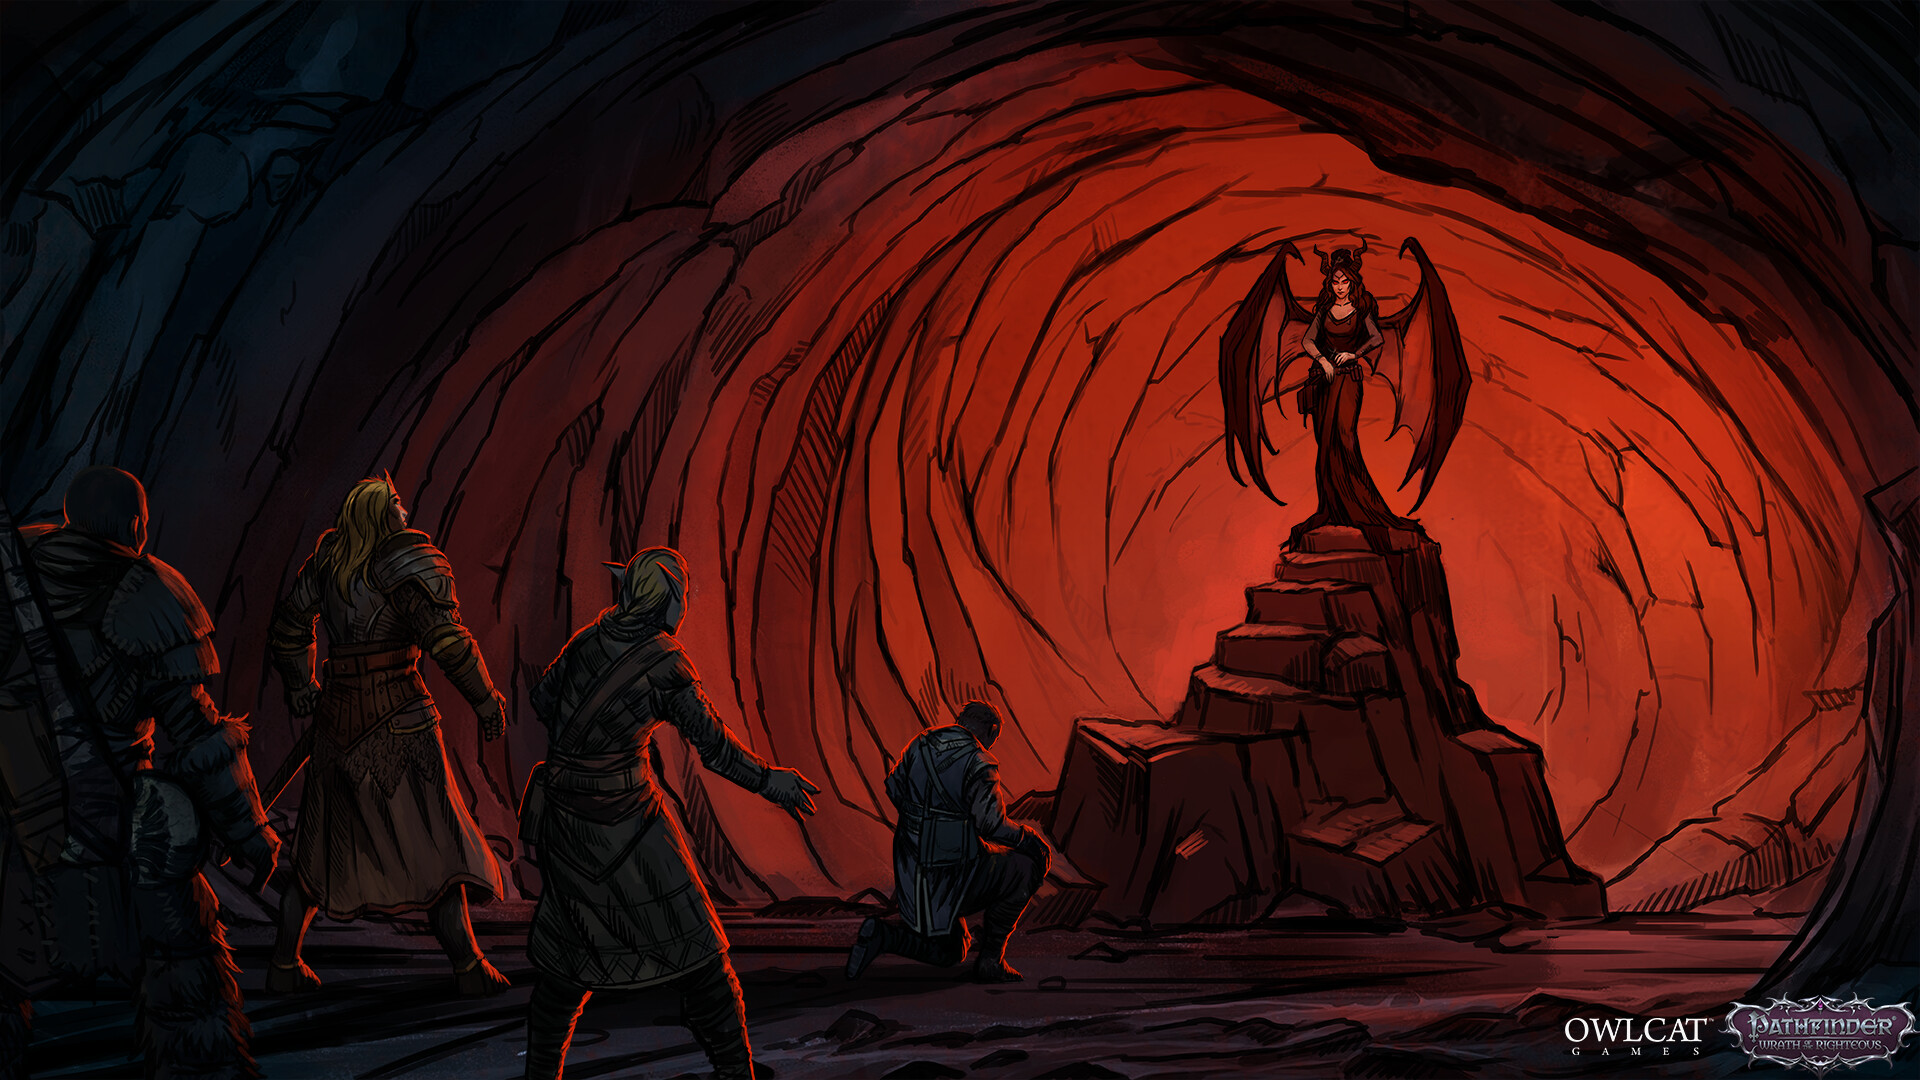 Pathfinder: Wrath of the Righteous HD wallpaper featuring adventurers approaching a mysterious winged statue in a cavernous setting, perfect for desktop background.